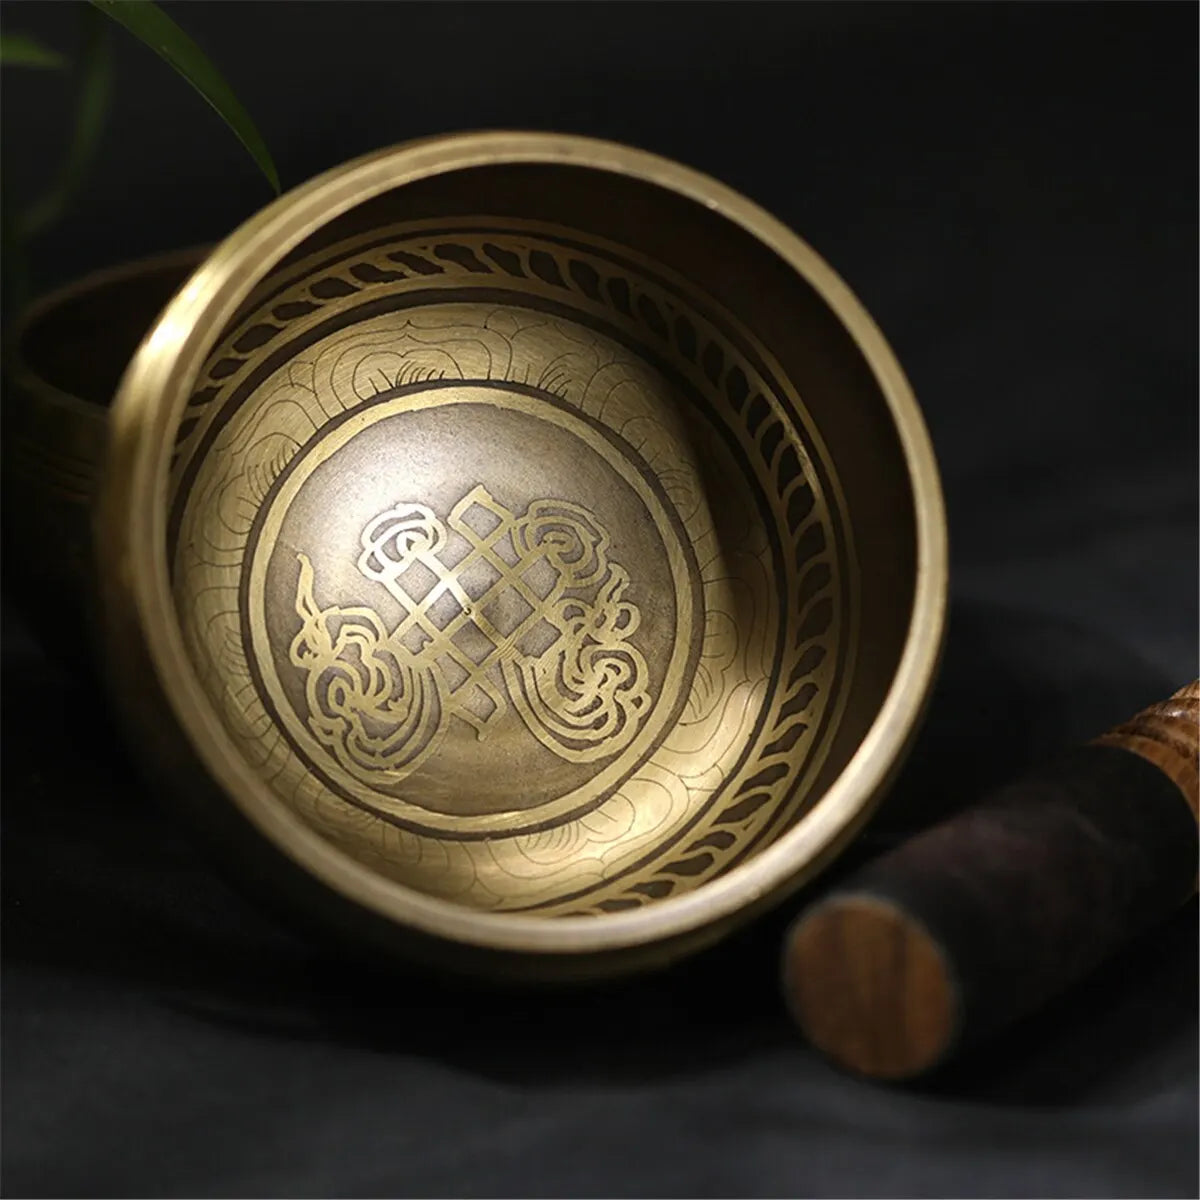 Tibetan Totem Sound Bowl Set | Handcrafted Meditation and Yoga Singing Bowl with Striker and Cushion